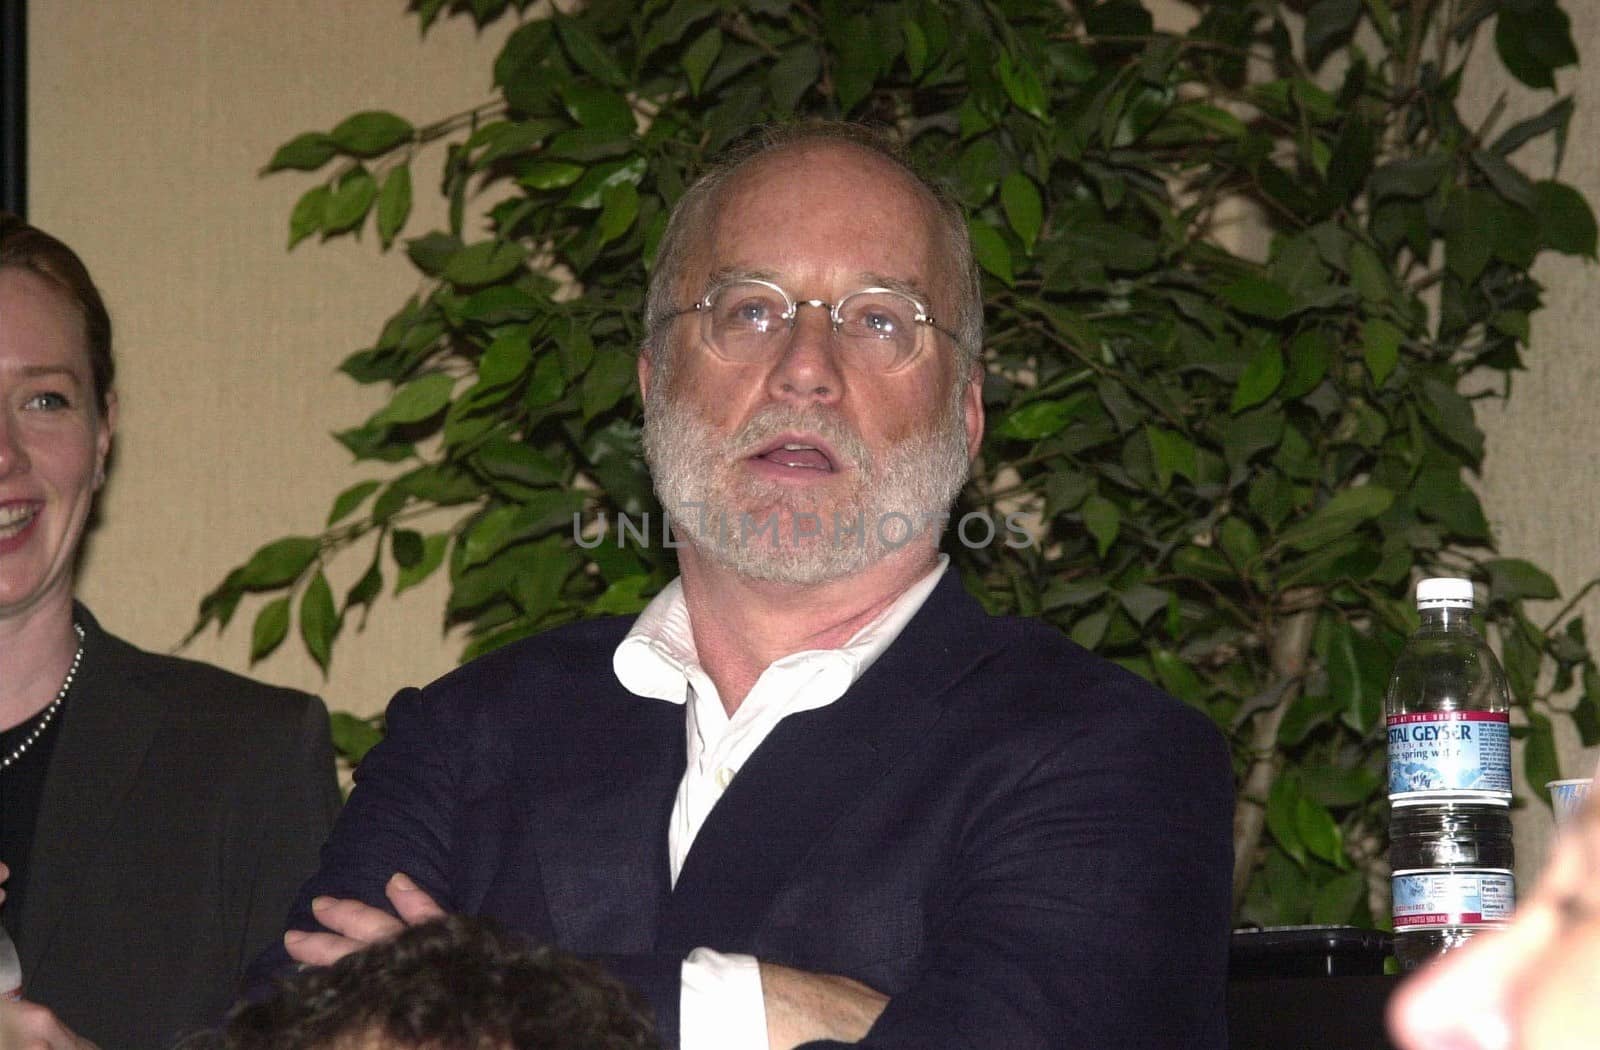 Richard Dreyfuss at a meeting of SAG and AFTRA where members showed their support for the strike against the advertising industry. Sag/Aftra headquarters, 06-13-00